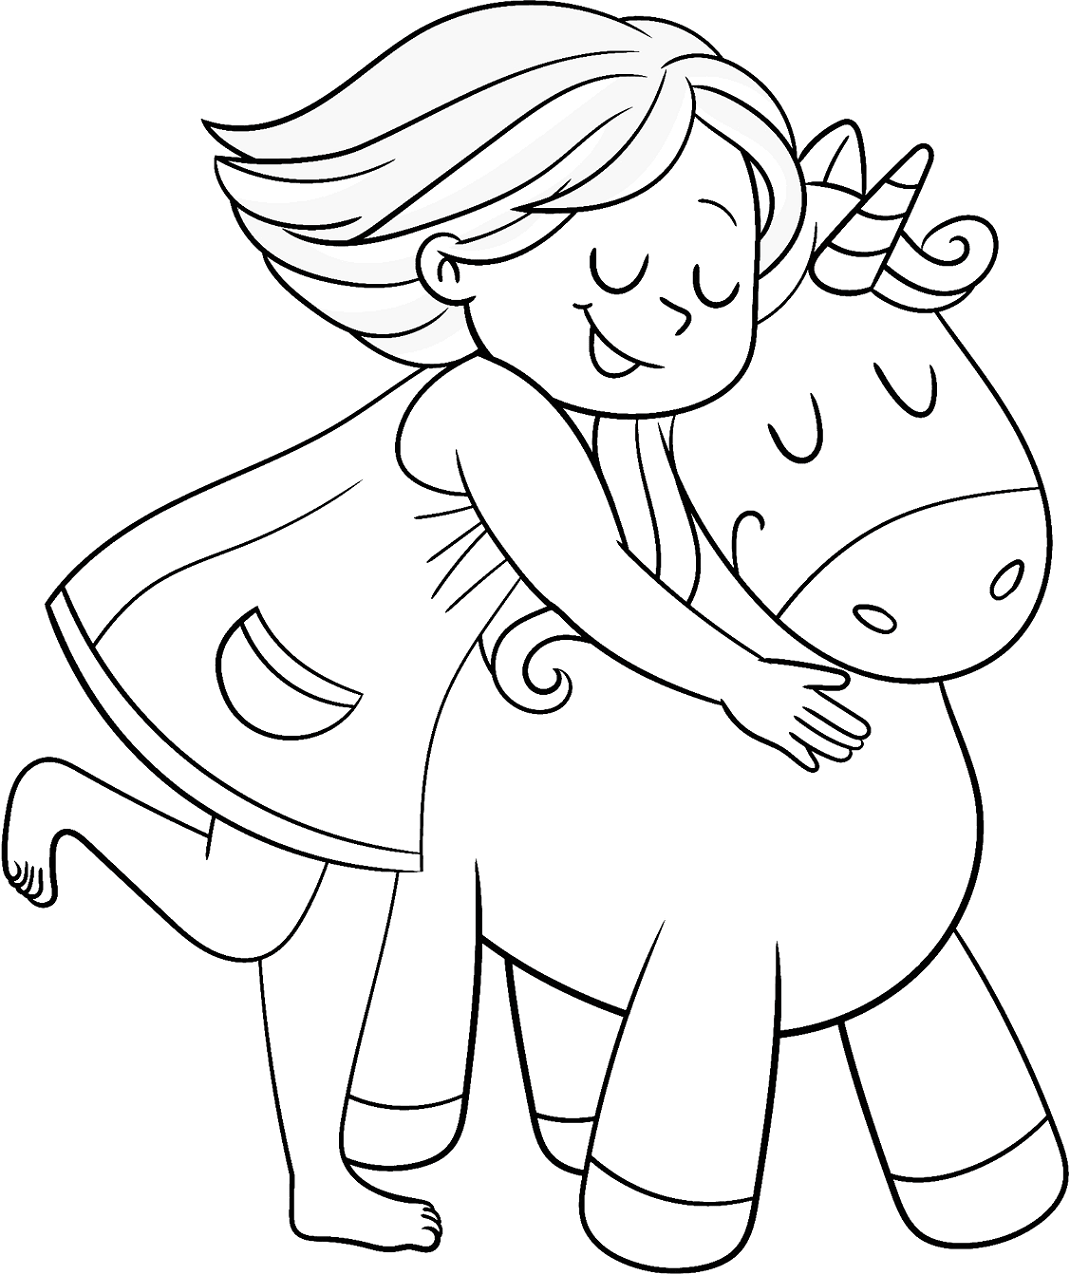 Girl With Unicorn Coloring Page   Free Printable Coloring Pages ...